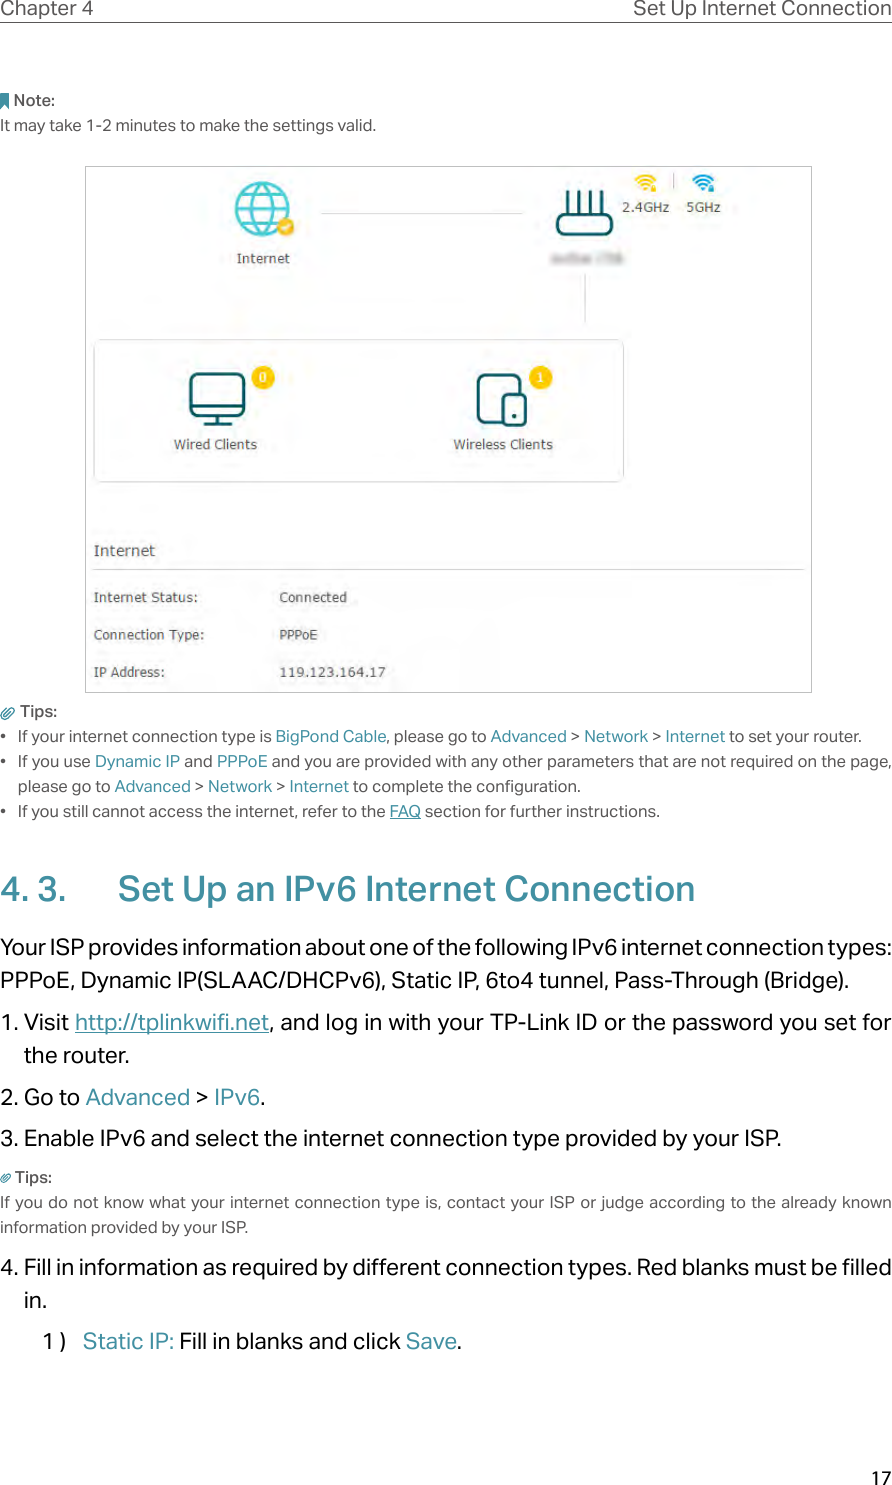 17Chapter 4 Set Up Internet ConnectionNote: It may take 1-2 minutes to make the settings valid. Tips: •  If your internet connection type is BigPond Cable, please go to Advanced &gt; Network &gt; Internet to set your router.•  If you use Dynamic IP and PPPoE and you are provided with any other parameters that are not required on the page, please go to Advanced &gt; Network &gt; Internet to complete the configuration.•  If you still cannot access the internet, refer to the FAQ section for further instructions.4. 3.  Set Up an IPv6 Internet ConnectionYour ISP provides information about one of the following IPv6 internet connection types: PPPoE, Dynamic IP(SLAAC/DHCPv6), Static IP, 6to4 tunnel, Pass-Through (Bridge).1. Visit http://tplinkwifi.net, and log in with your TP-Link ID or the password you set for the router.2. Go to Advanced &gt; IPv6. 3. Enable IPv6 and select the internet connection type provided by your ISP.Tips:If you do not know what your internet connection type is, contact your ISP or judge according to the already known information provided by your ISP.4. Fill in information as required by different connection types. Red blanks must be filled in.1 )  Static IP: Fill in blanks and click Save.